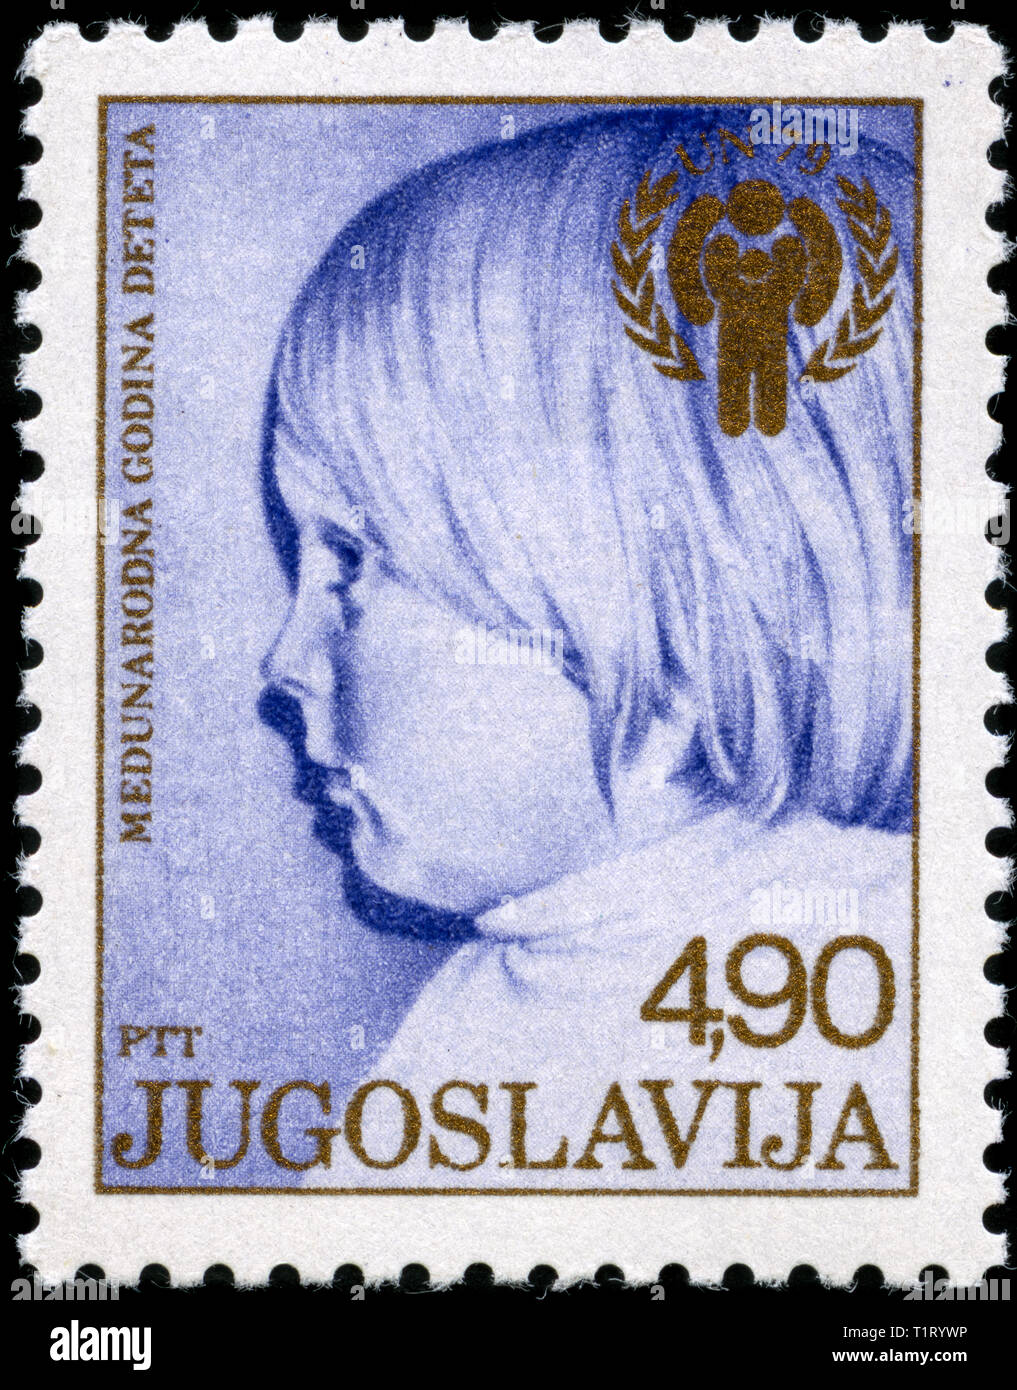 Postage stamp from the former state of Yugoslavia in the International Year of the Child series issued in 1979 Stock Photo